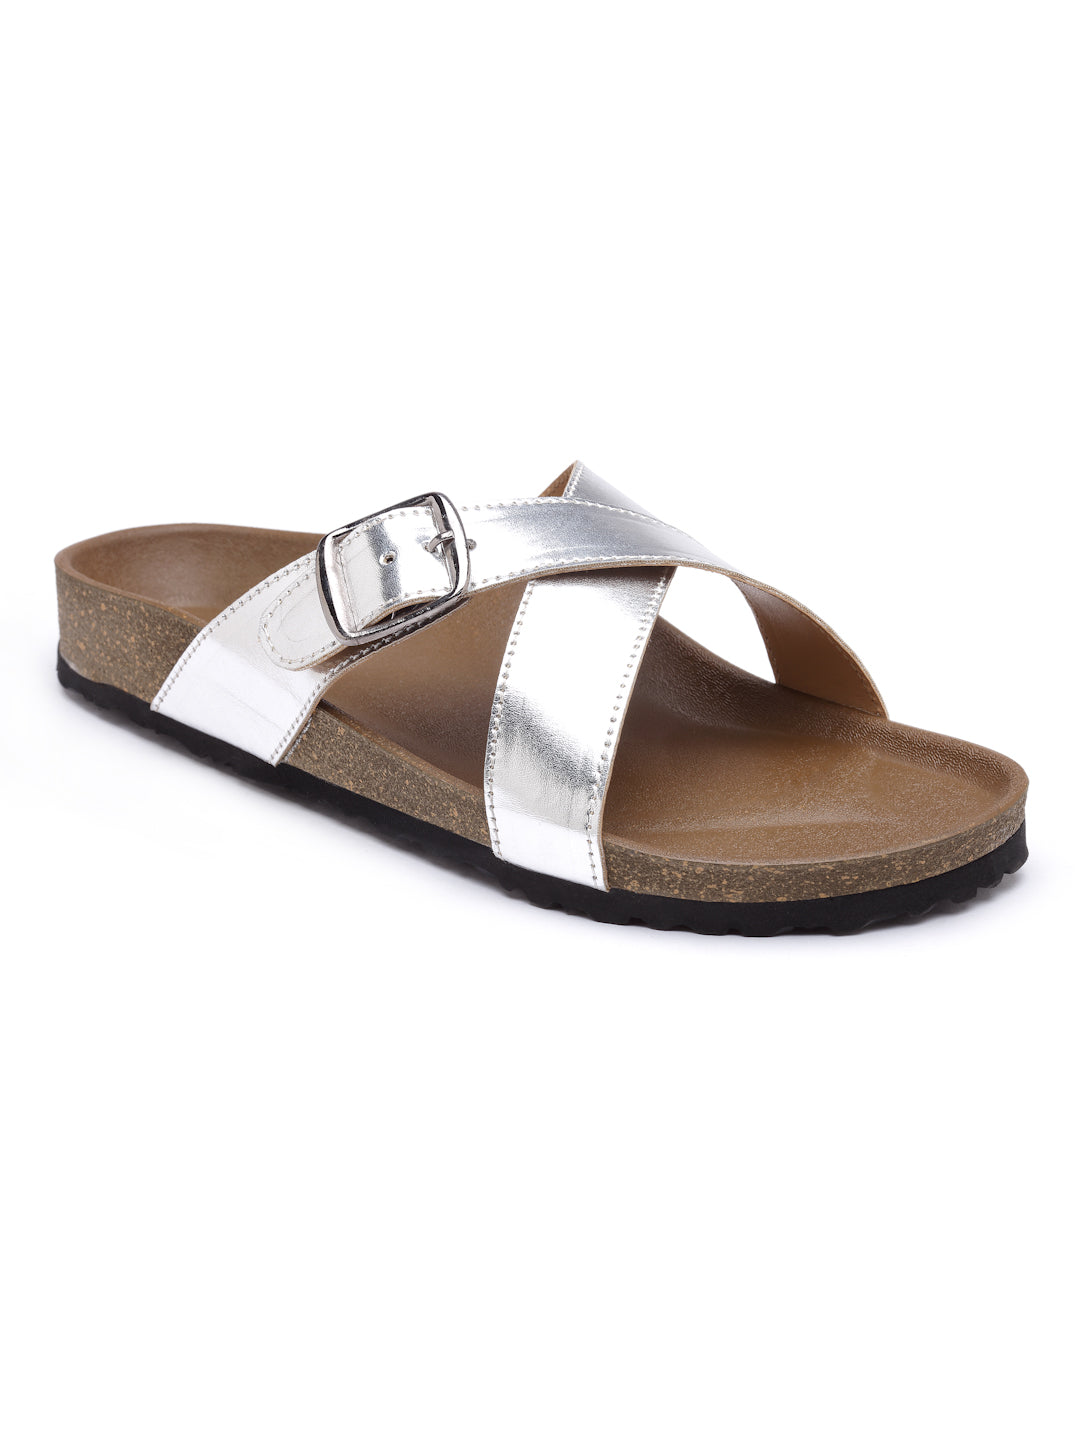 Women's Stylish Silver Synthetic Leather Casual Sandal